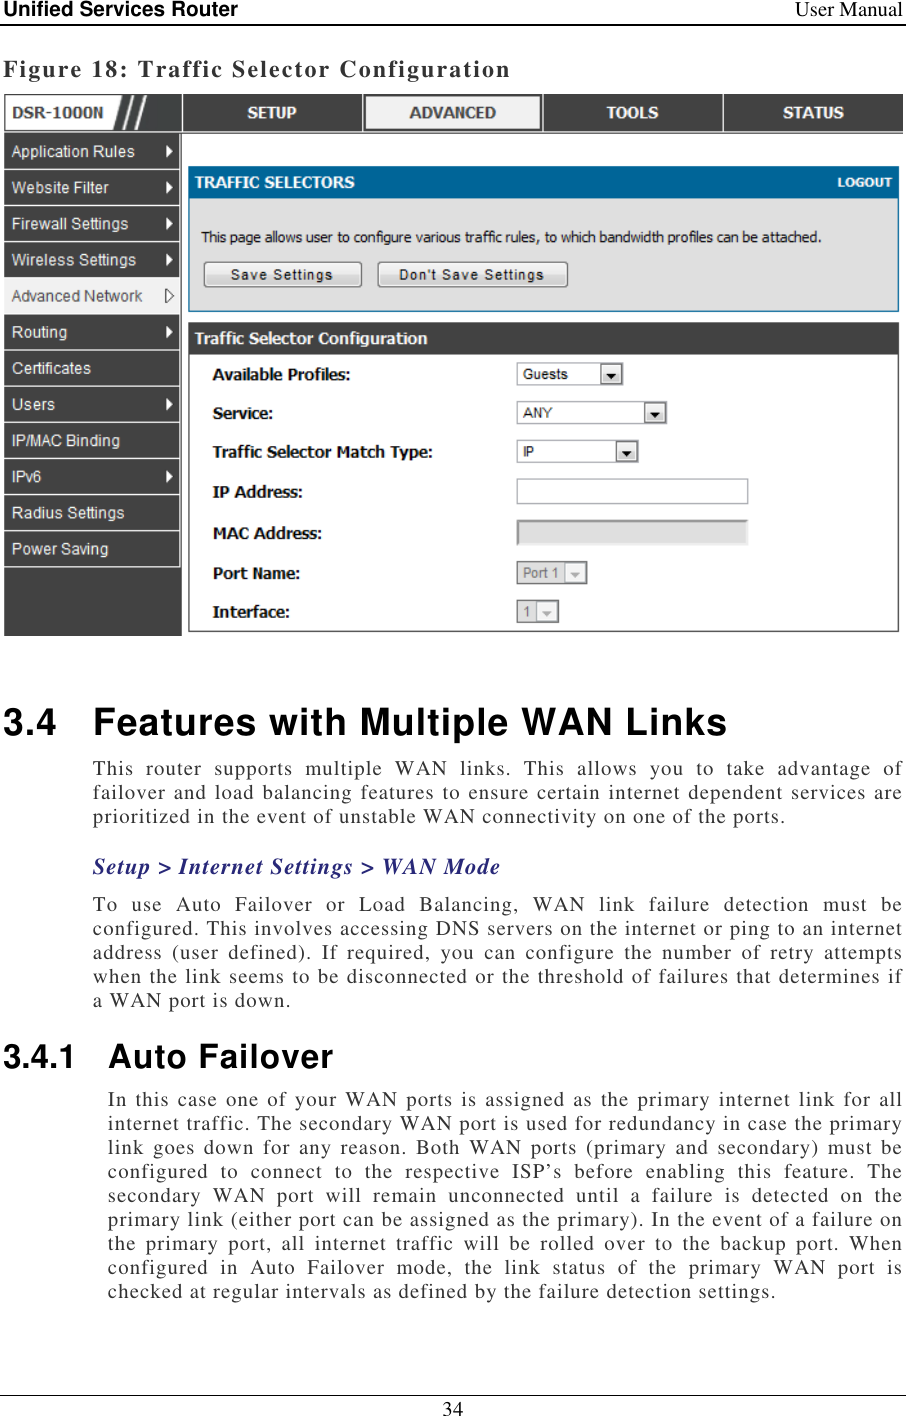 Unified Services Router    User Manual 34  Figure 18: Traffic Selector Configuration   3.4  Features with Multiple WAN Links This  router  supports  multiple  WAN  links.  This  allows  you  to  take  advantage  of failover and load balancing features to ensure certain internet dependent services are prioritized in the event of unstable WAN connectivity on one of the ports.  Setup &gt; Internet Settings &gt; WAN Mode To  use  Auto  Failover  or  Load  Balancing,  WAN  link  failure  detection  must  be configured. This involves accessing DNS servers on the internet or ping to an internet address  (user  defined).  If  required,  you  can  configure  the  number  of  retry  attempts when the link seems to be disconnected or the threshold of failures that determines if a WAN port is down. 3.4.1  Auto Failover In this case  one of  your  WAN ports is  assigned as the  primary internet  link  for all internet traffic. The secondary WAN port is used for redundancy in case the primary link  goes  down  for  any  reason. Both  WAN  ports  (primary  and  secondary)  must  be configured  to  connect  to  the  respective  ISP’s  before  enabling  this  feature.  The secondary  WAN  port  will  remain  unconnected  until  a  failure  is  detected  on  the primary link (either port can be assigned as the primary). In the event of a failure on the  primary  port,  all  internet  traffic  will  be  rolled  over  to  the  backup  port.  When configured  in  Auto  Failover  mode,  the  link  status  of  the  primary  WAN  port  is checked at regular intervals as defined by the failure detection settings.  